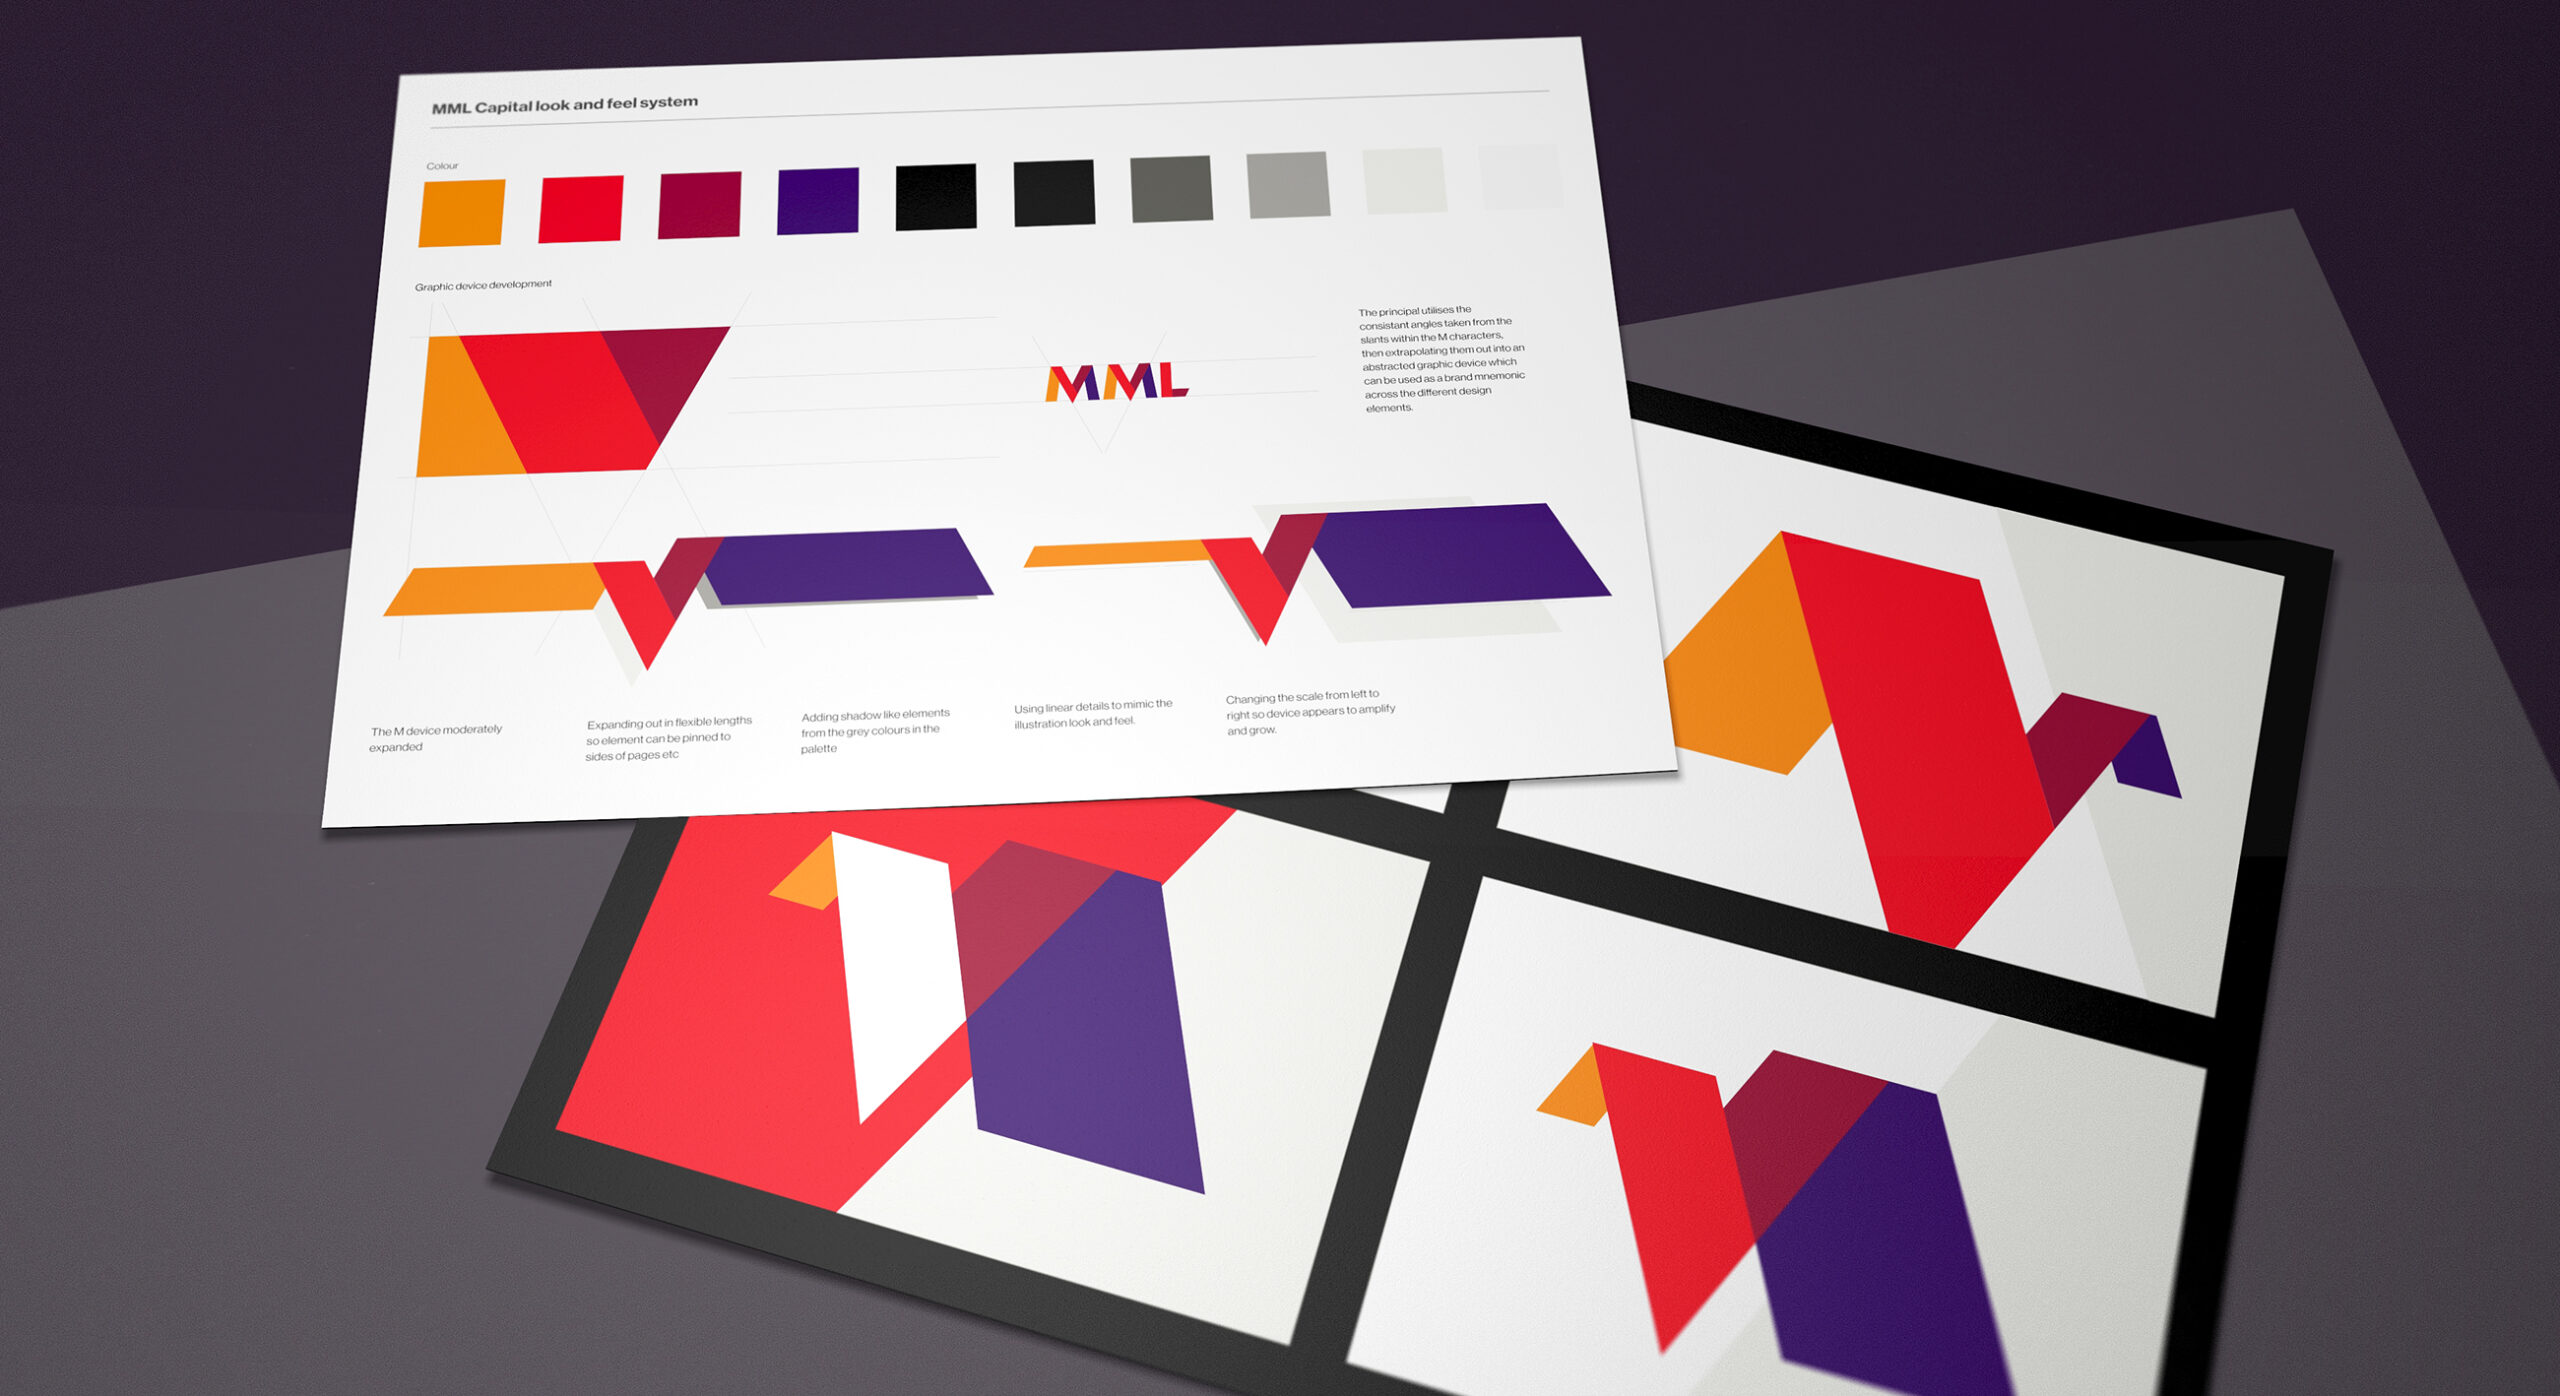 The brand visual identity is supported by secondary graphic assets. These are used in print applications such as stationery, communications and PPT design. 